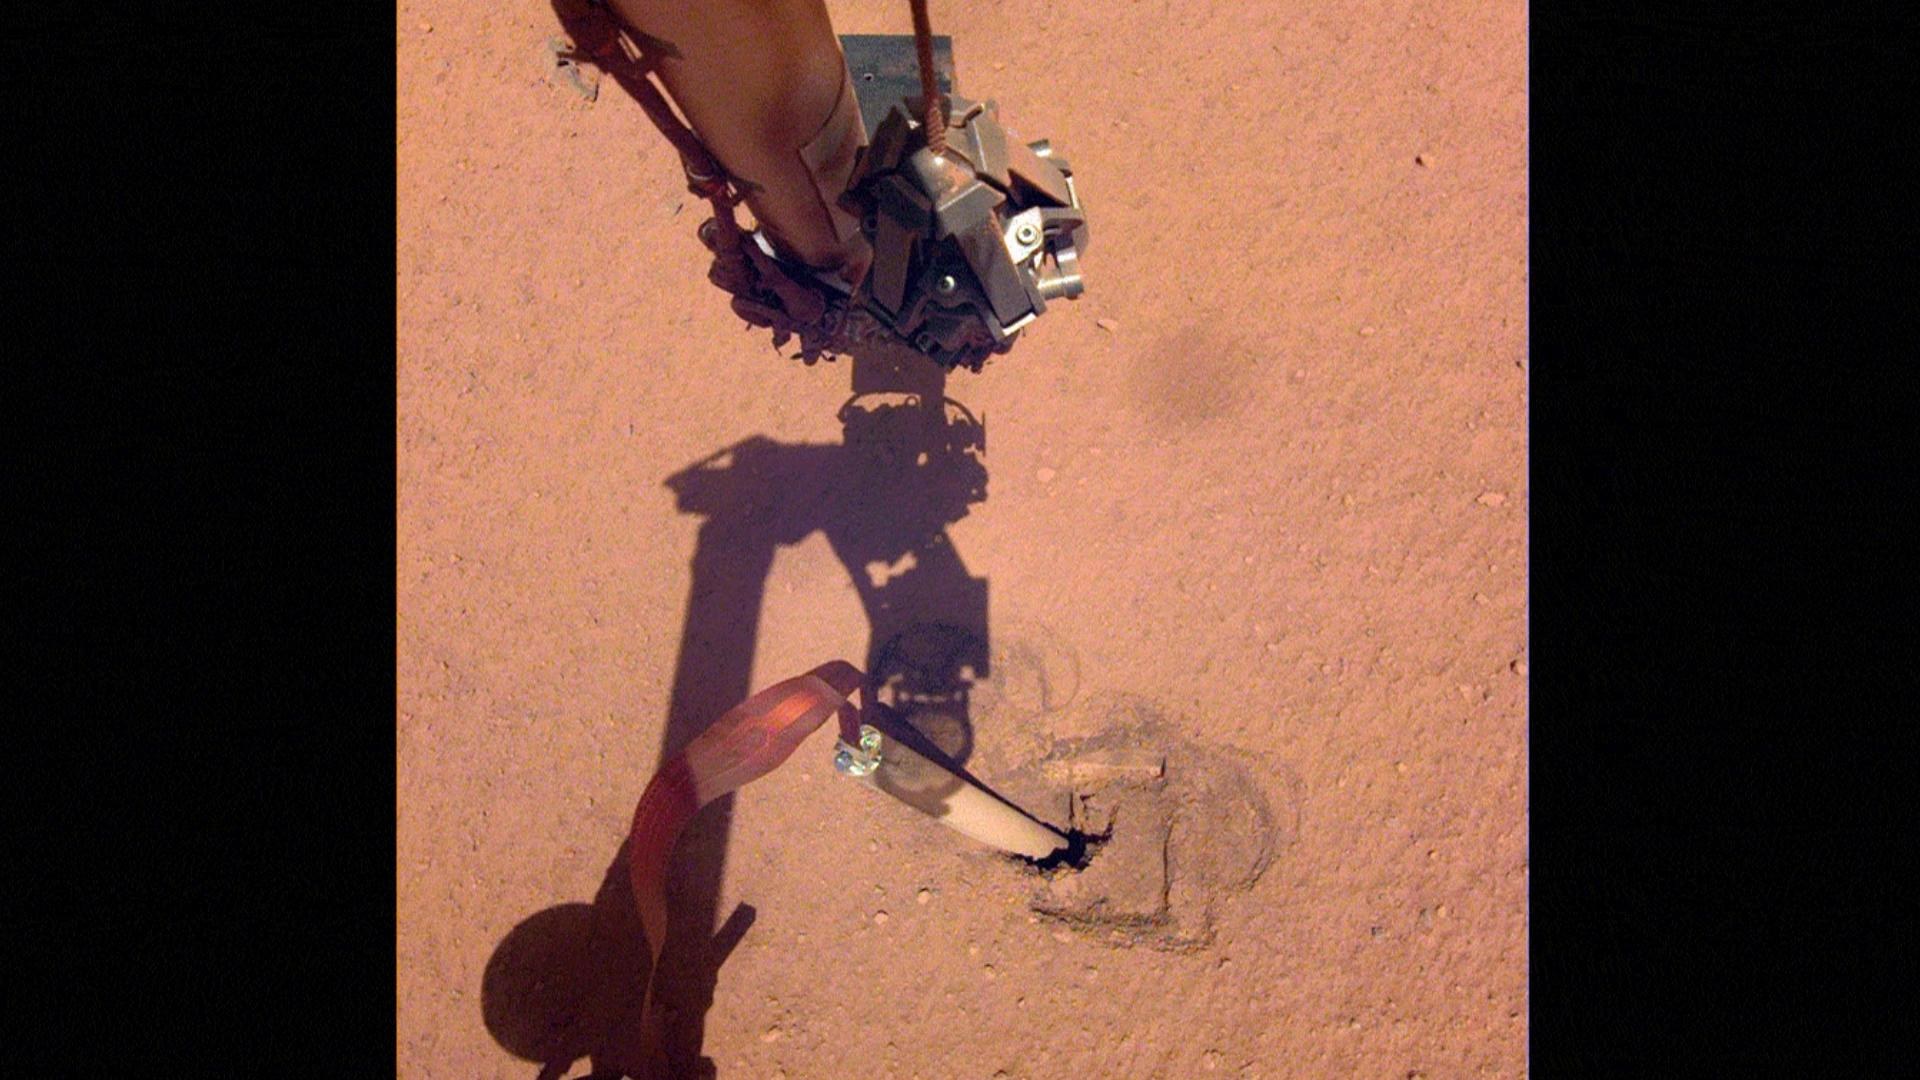 Still video: InSight's arm camera stares into the pit